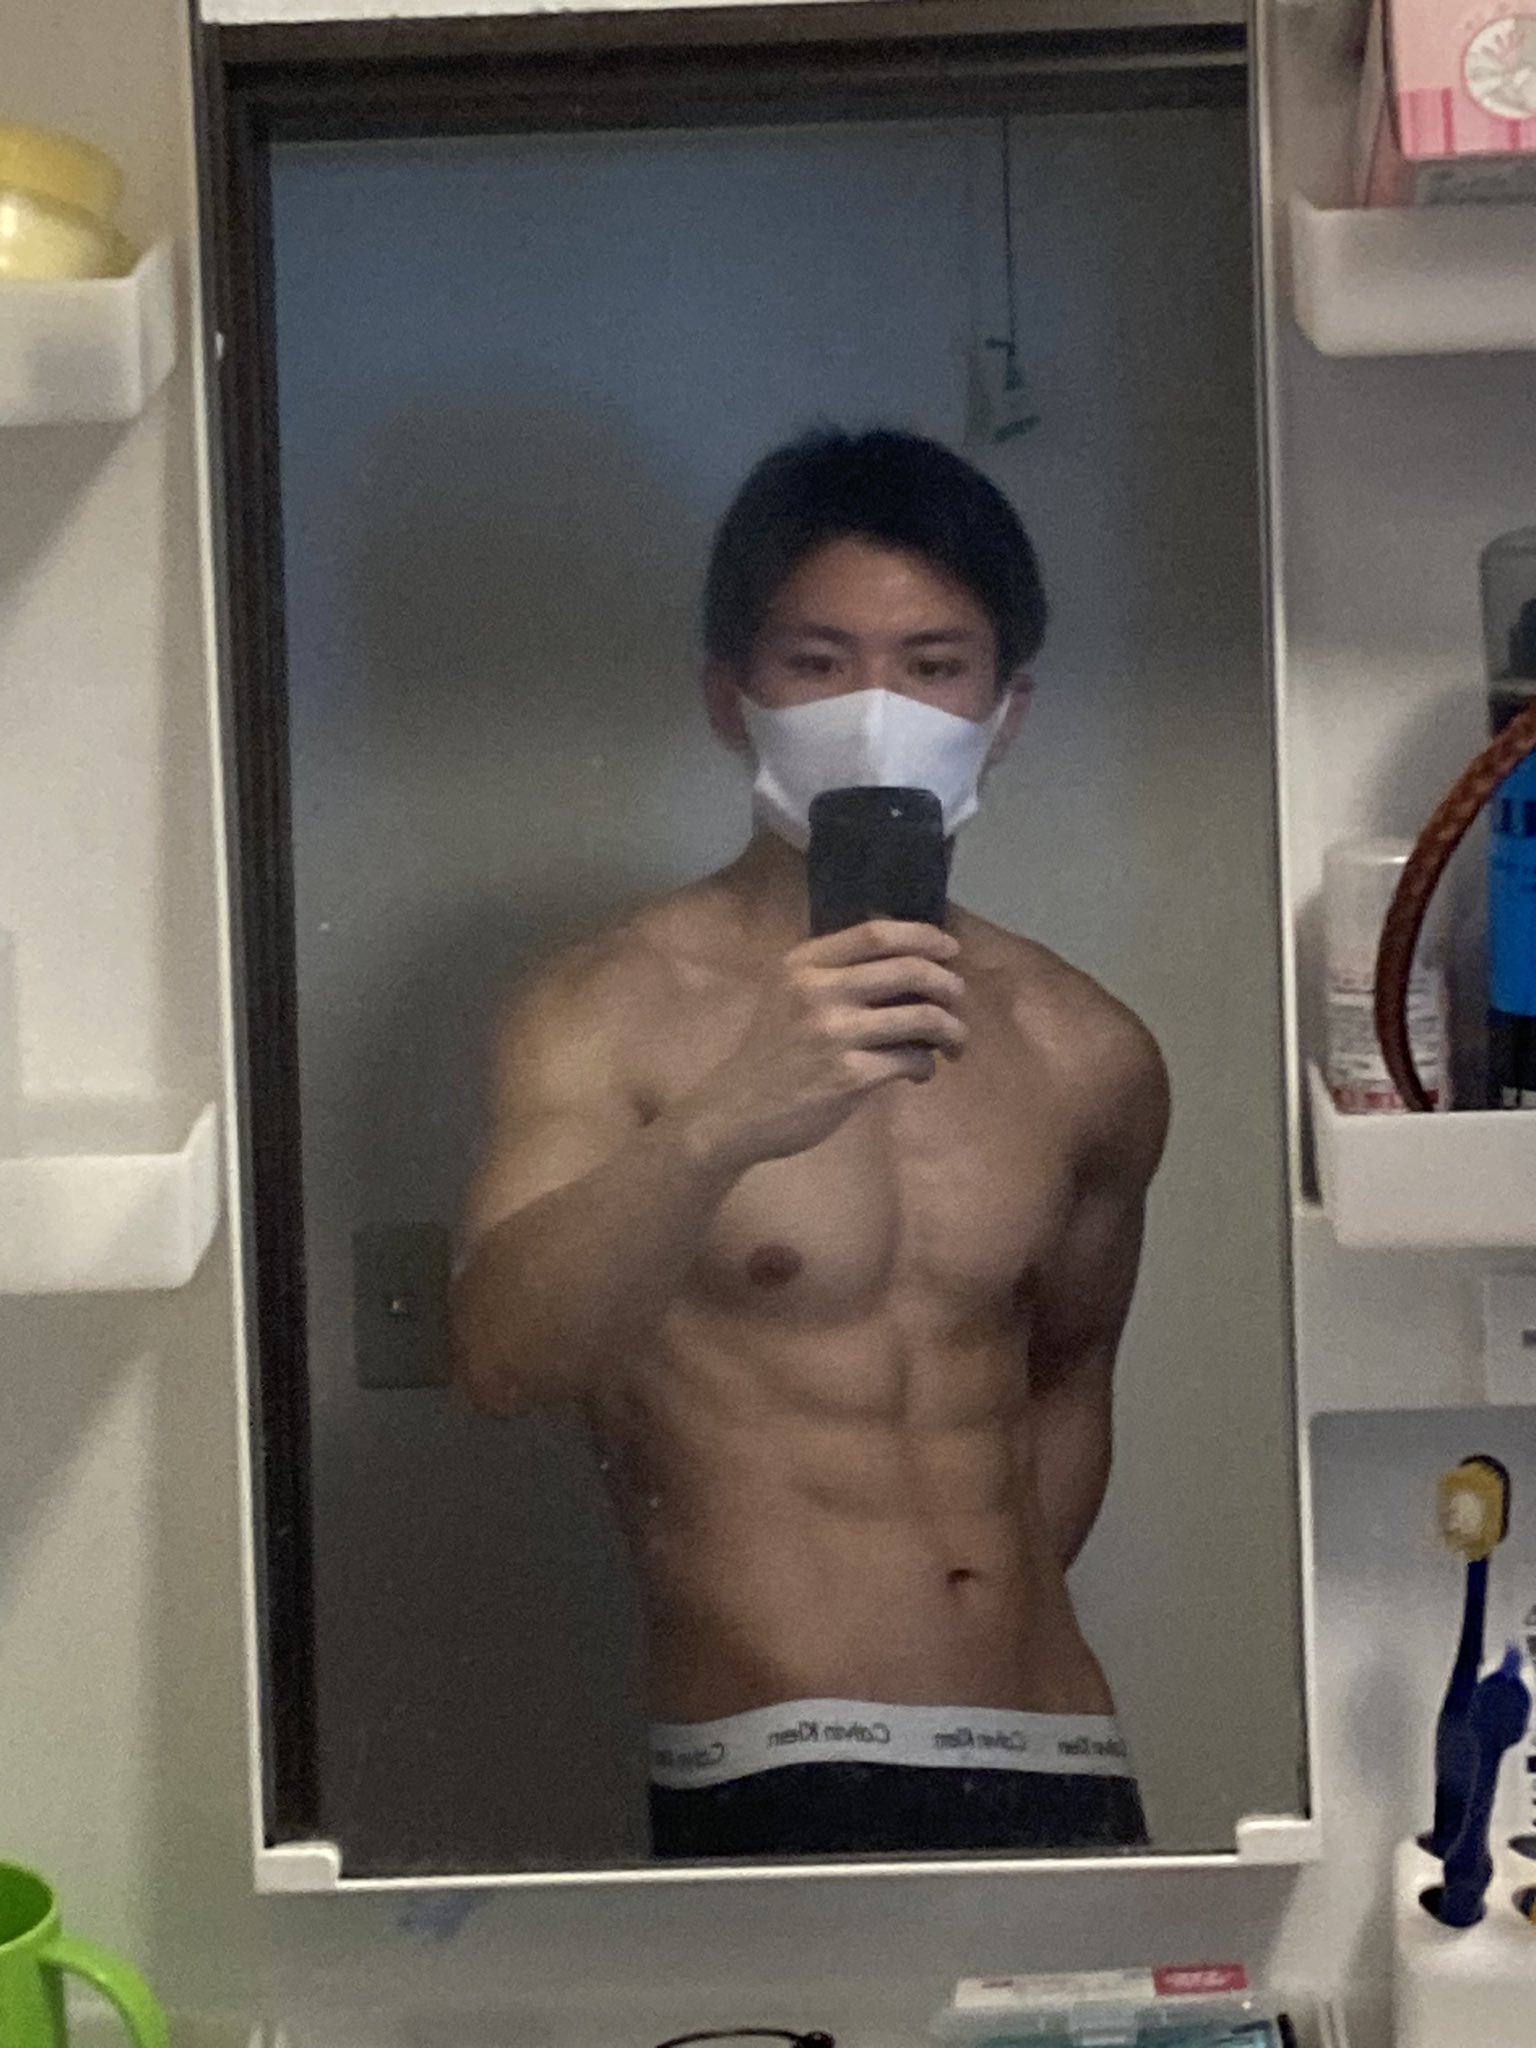 Lower Belly Fat still here. I want to get to the last pic. Next steps? :  r/GettingShredded